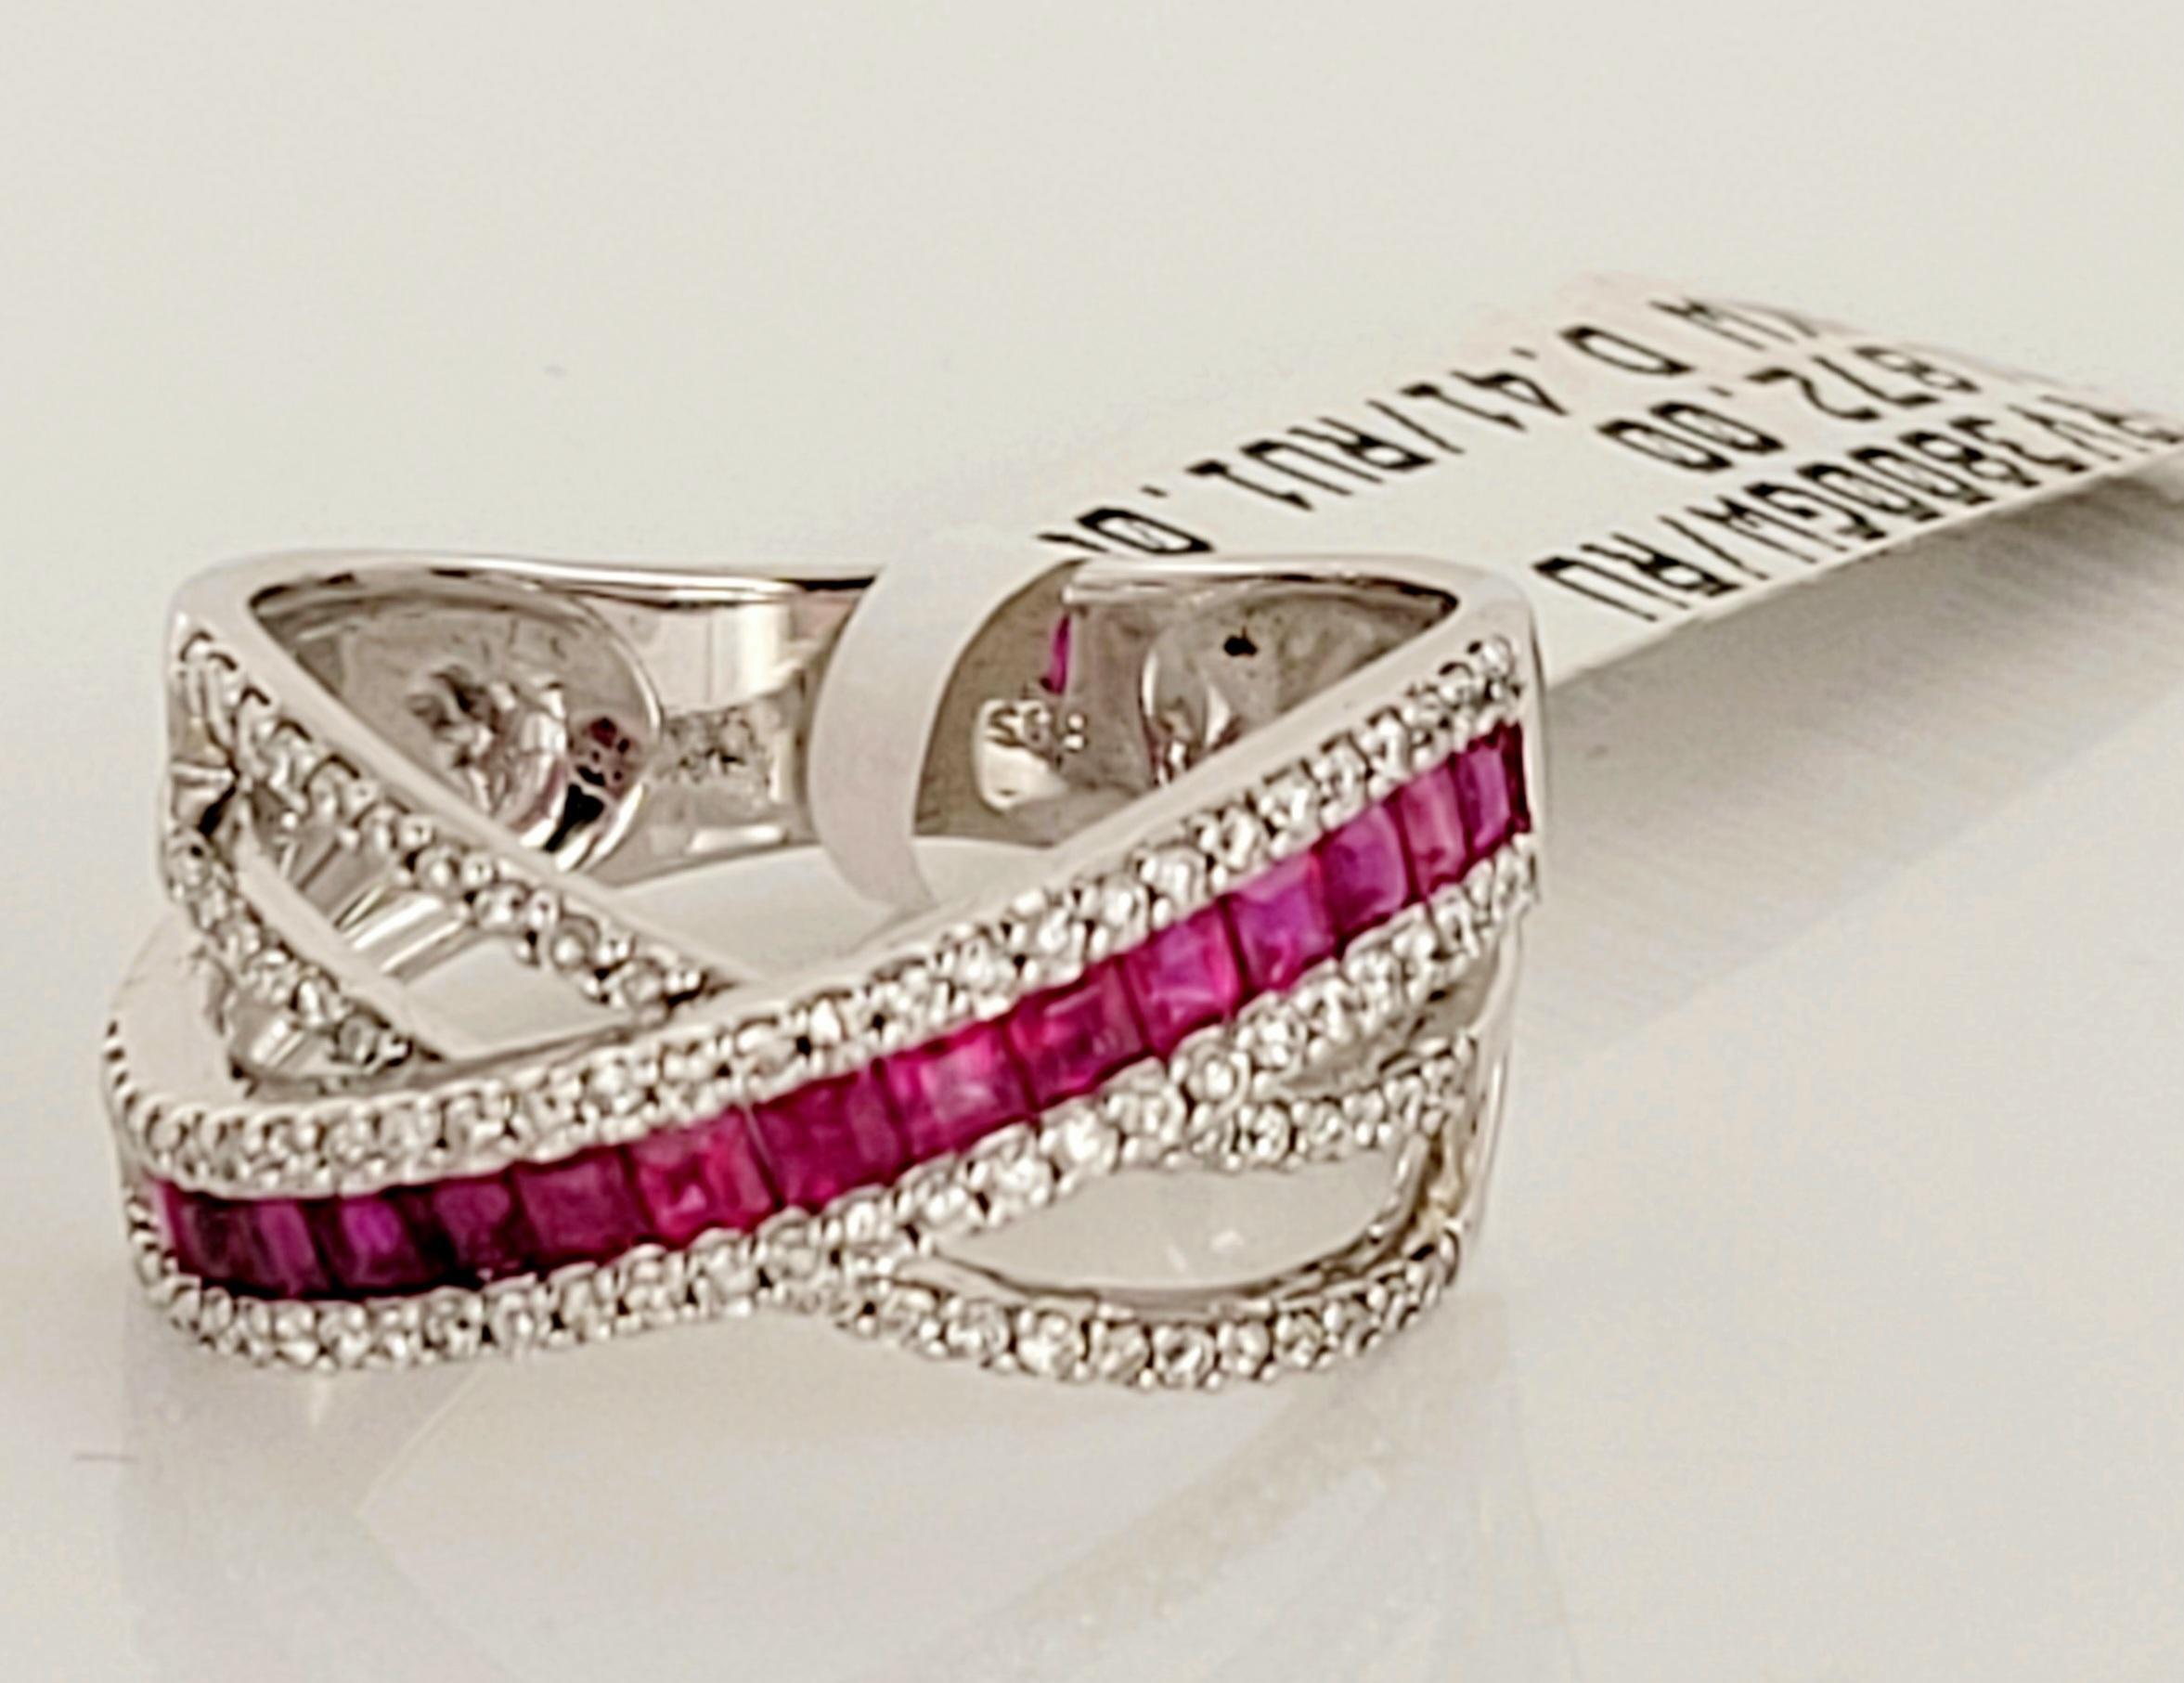 Exquisite, beautiful, fine Ruby and Diamond Ring
Material 14K White Gold
Diamond  0.41ctw
Ruby 1.08ctw
Ring Size 6.75
Weight: 4.9 grams
Gender Women 
Condition New, never worn 
Ring is not Sizable